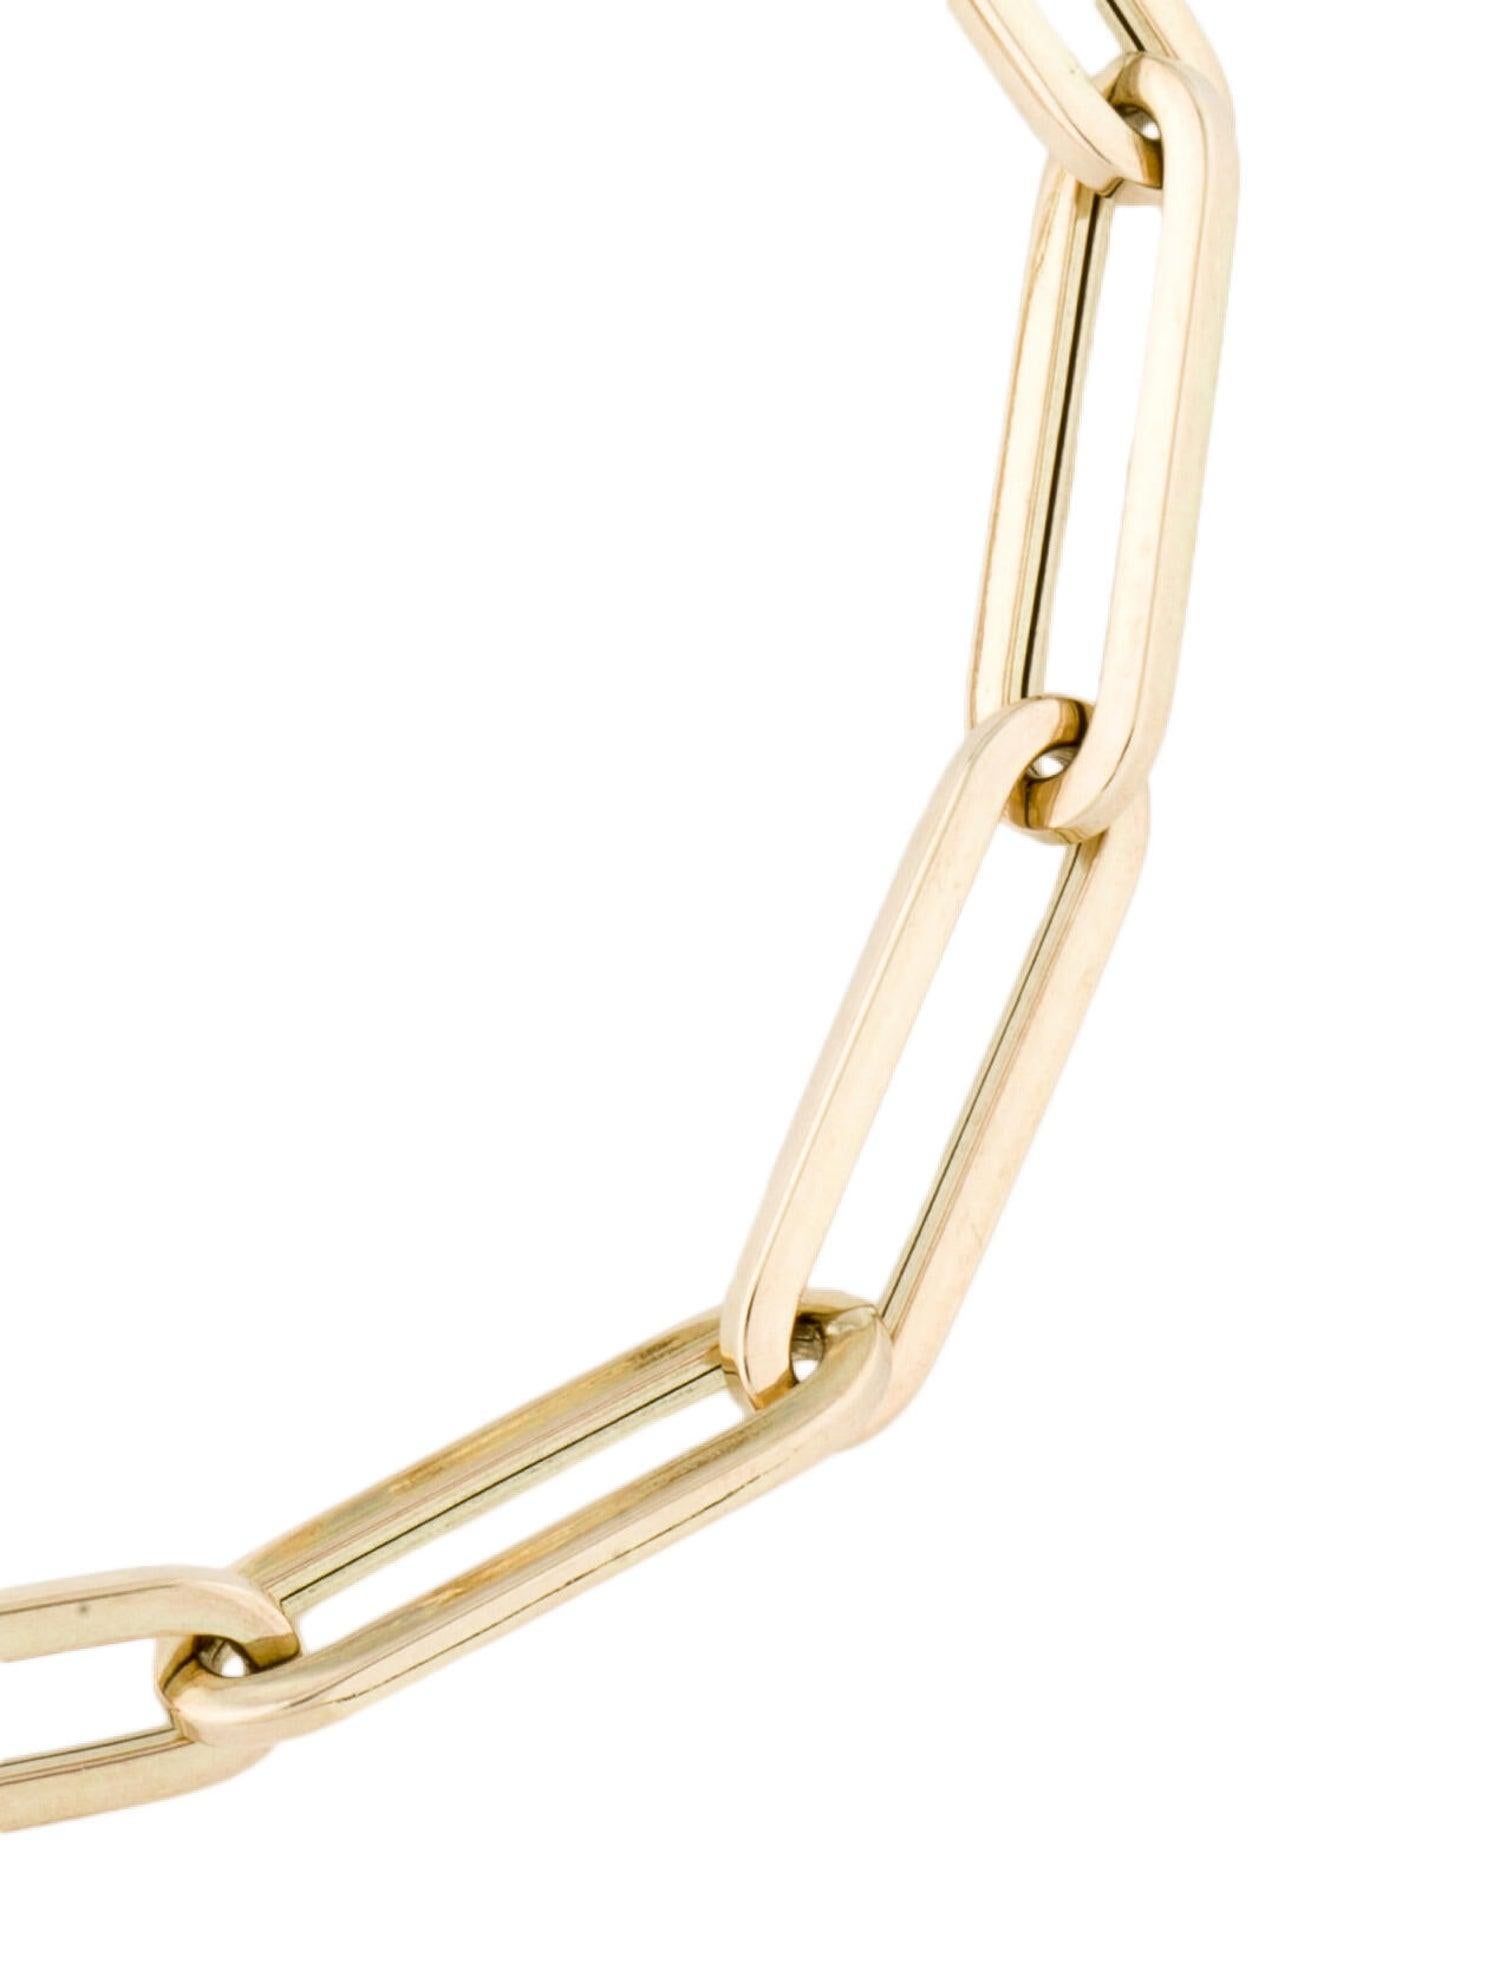 EFFORTLESSLY CHIC - Wrap your wrist in this dainty 14k Yellow, White or Rose Gold link bracelet. Crafted in Italy, the paperclip look creates an organic design with brilliant shine. This chain bracelet opens up making it simple to close lobster lock